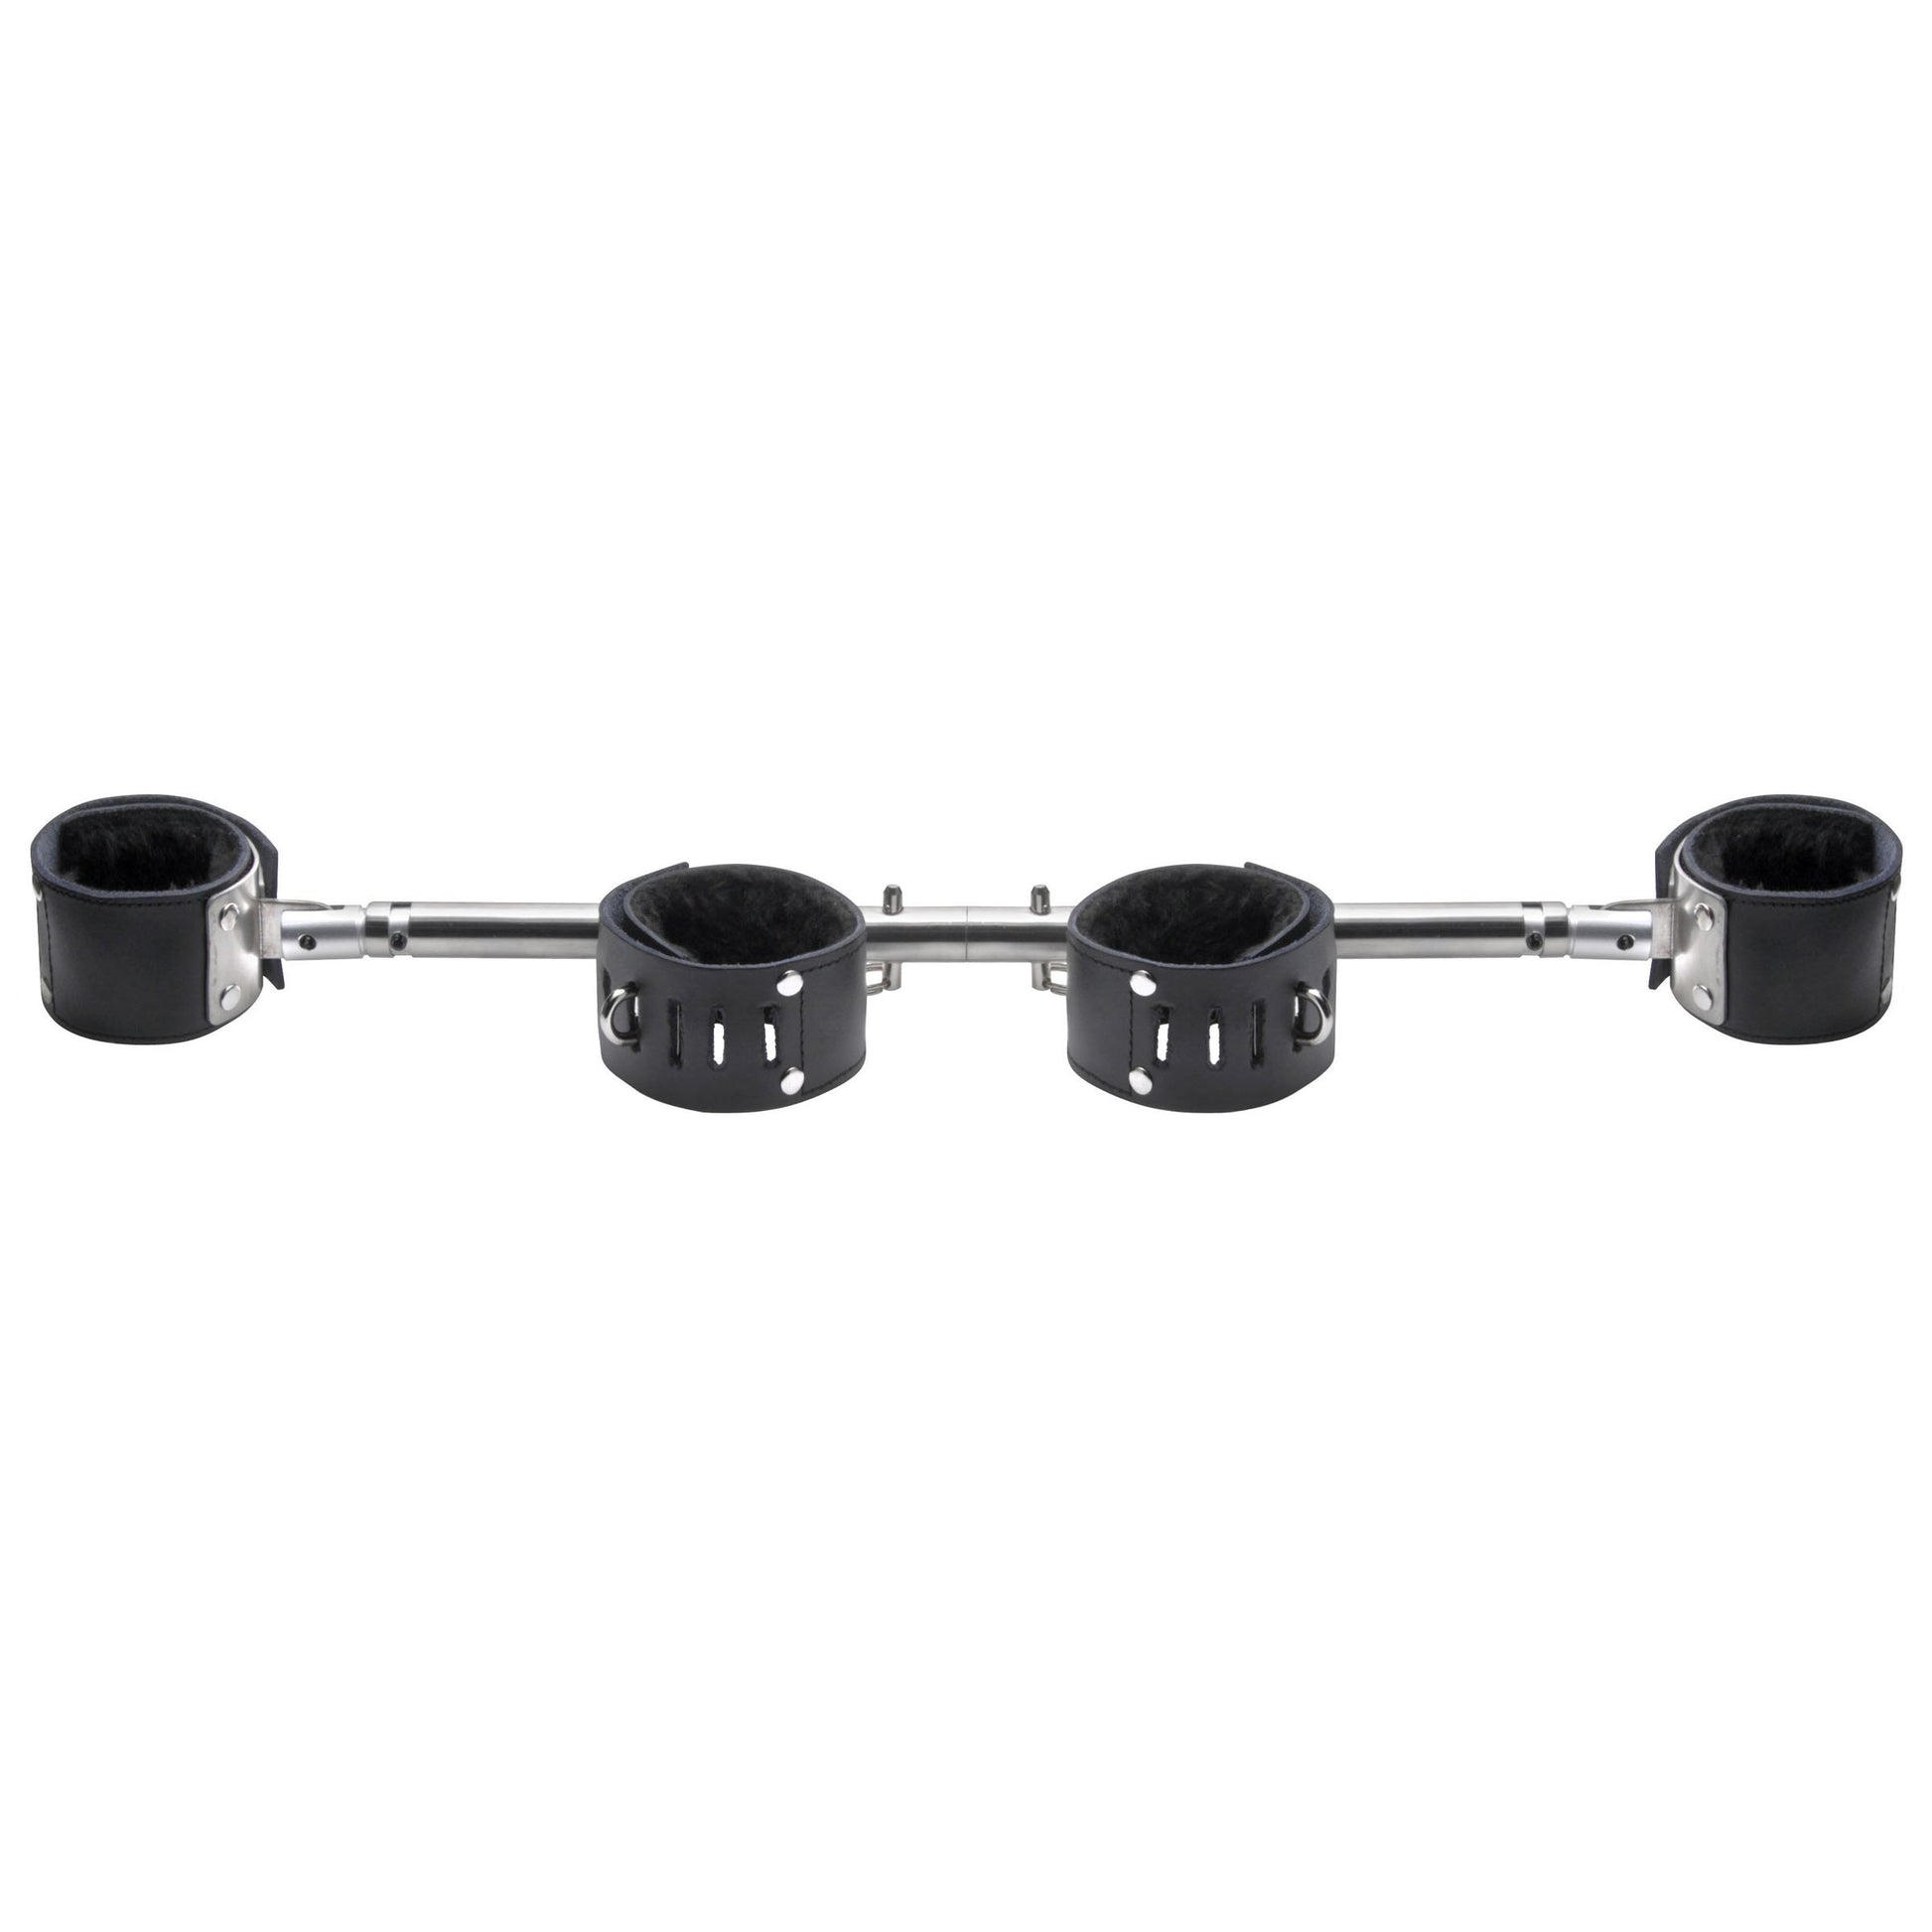 Unrestricted Access Spreader Bar Kit with Ring Gag - UABDSM